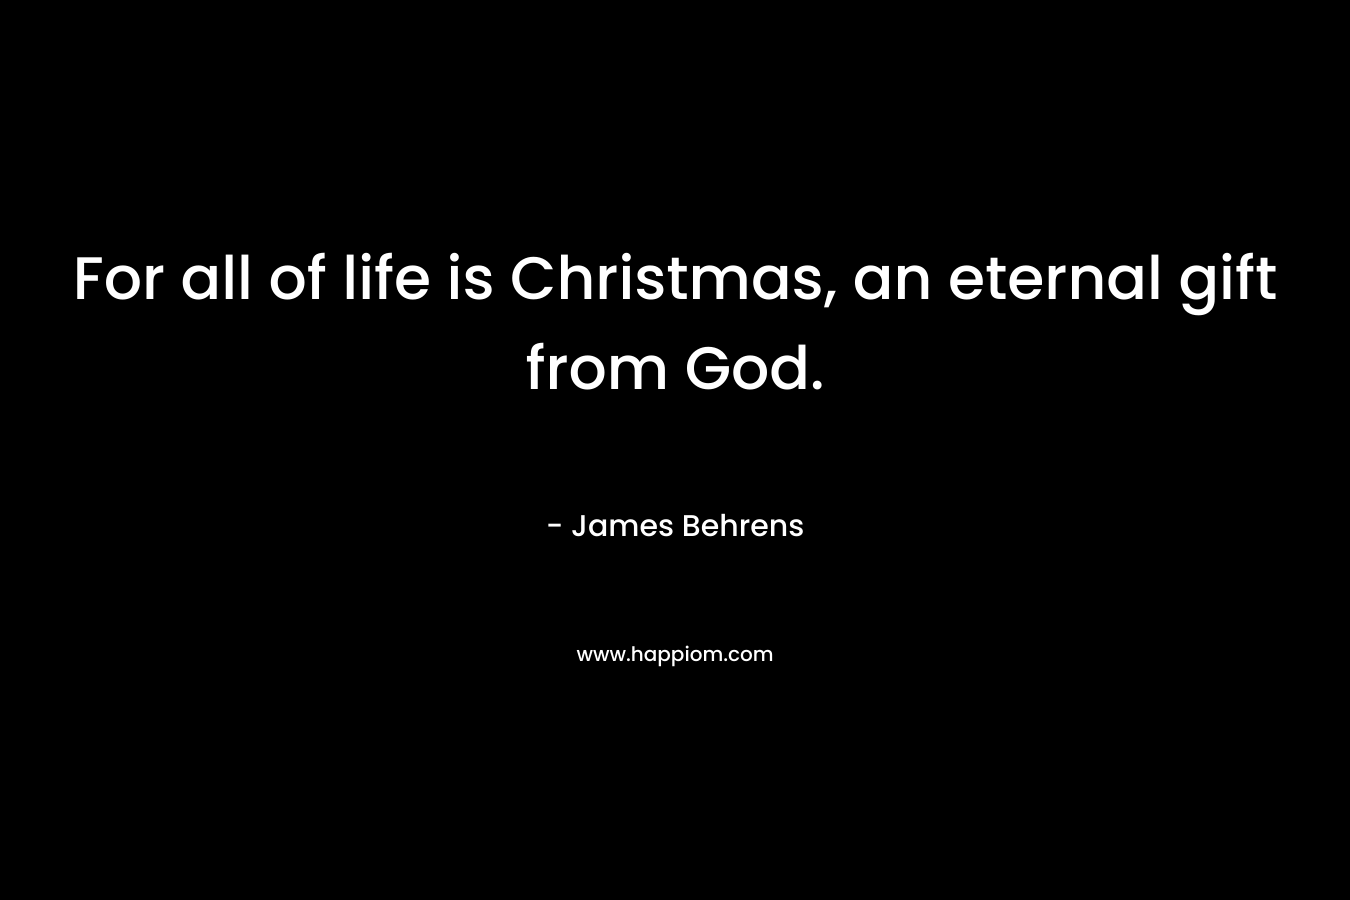 For all of life is Christmas, an eternal gift from God.